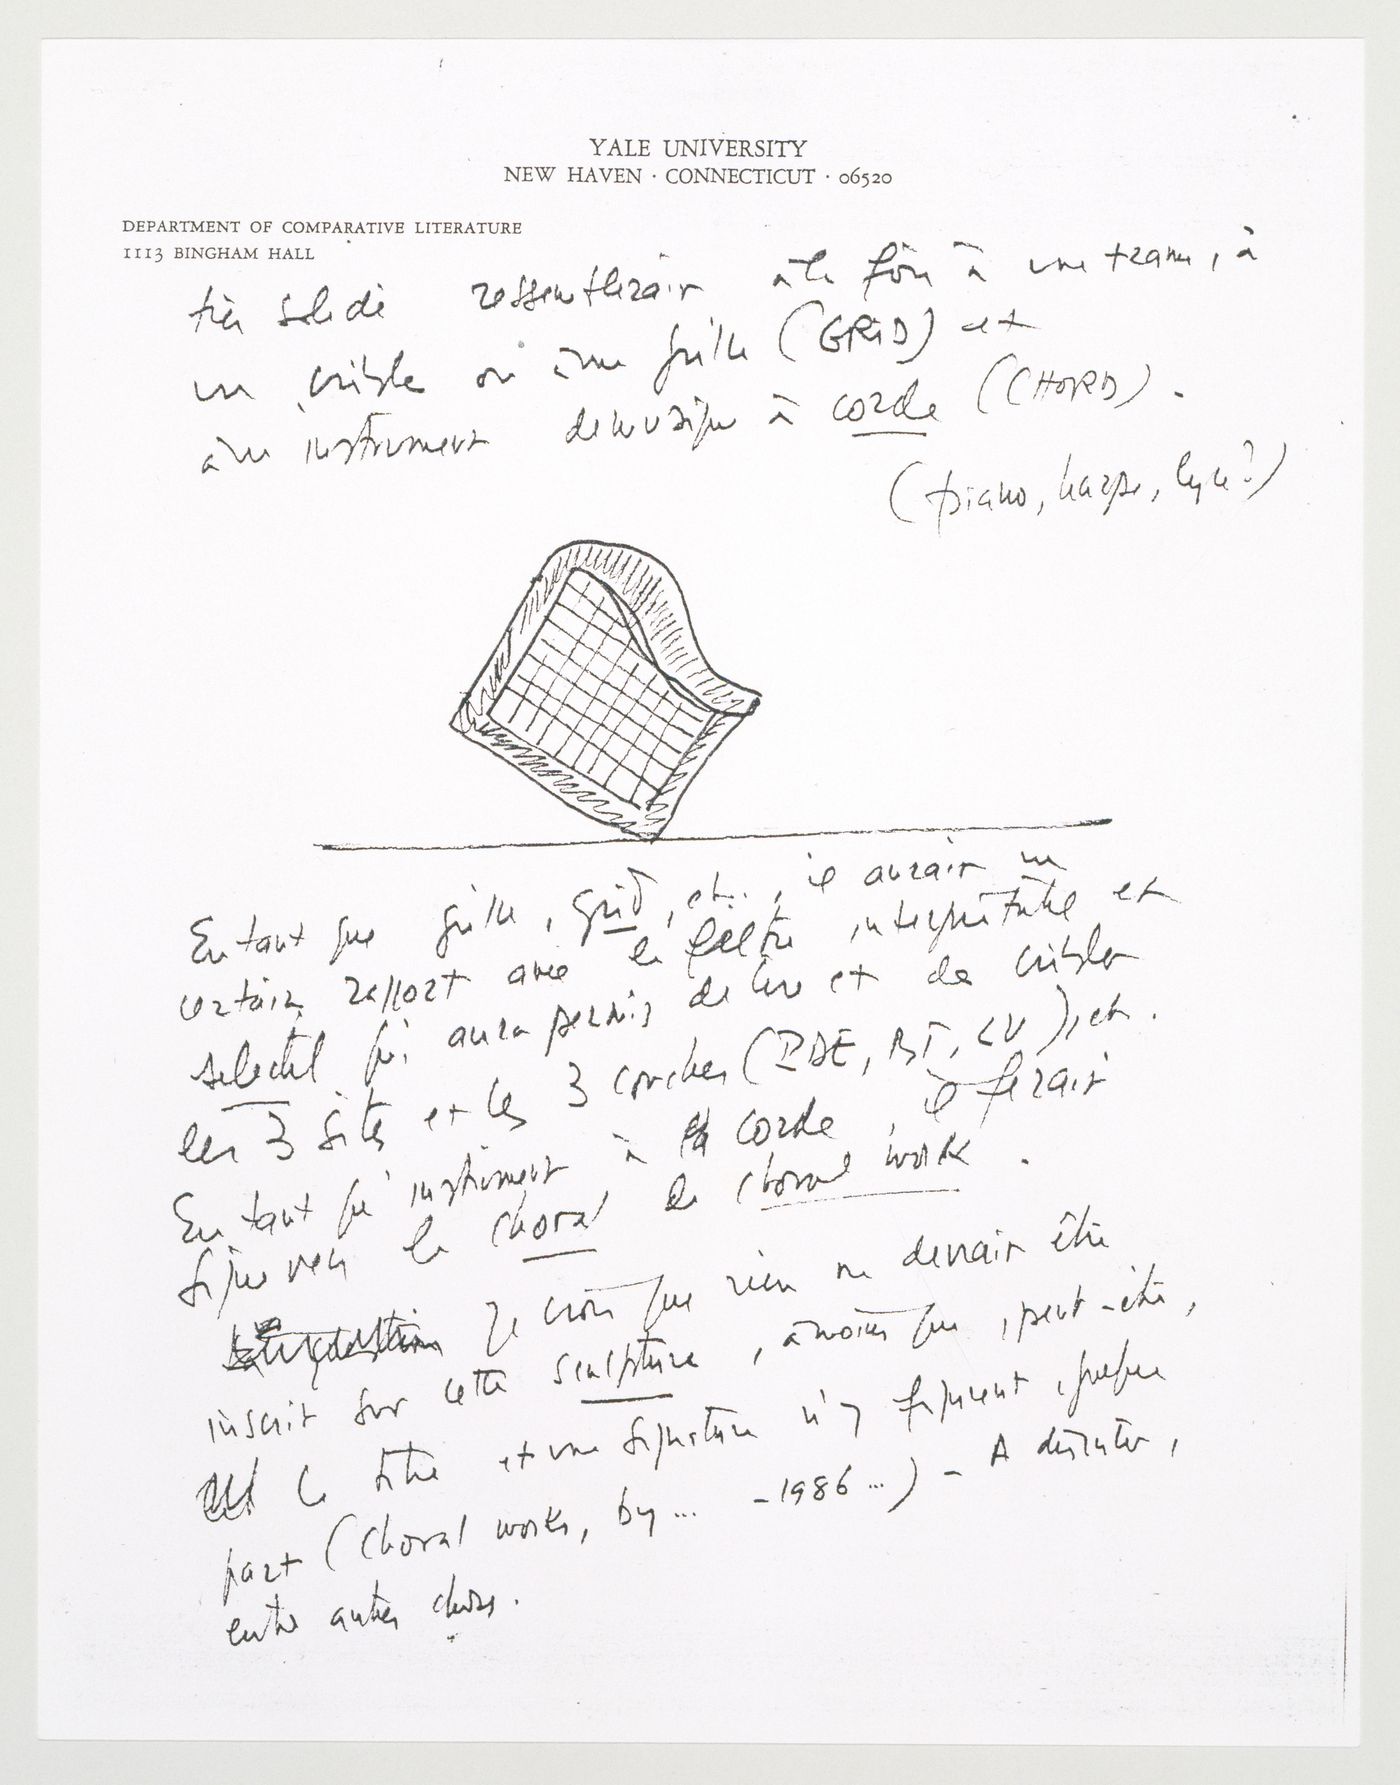 Photocopy of a draft of a letter to Peter Eisenman with drawing for the chora, Project for a Garden, Parc de la Villette, Paris (Chora L Works)